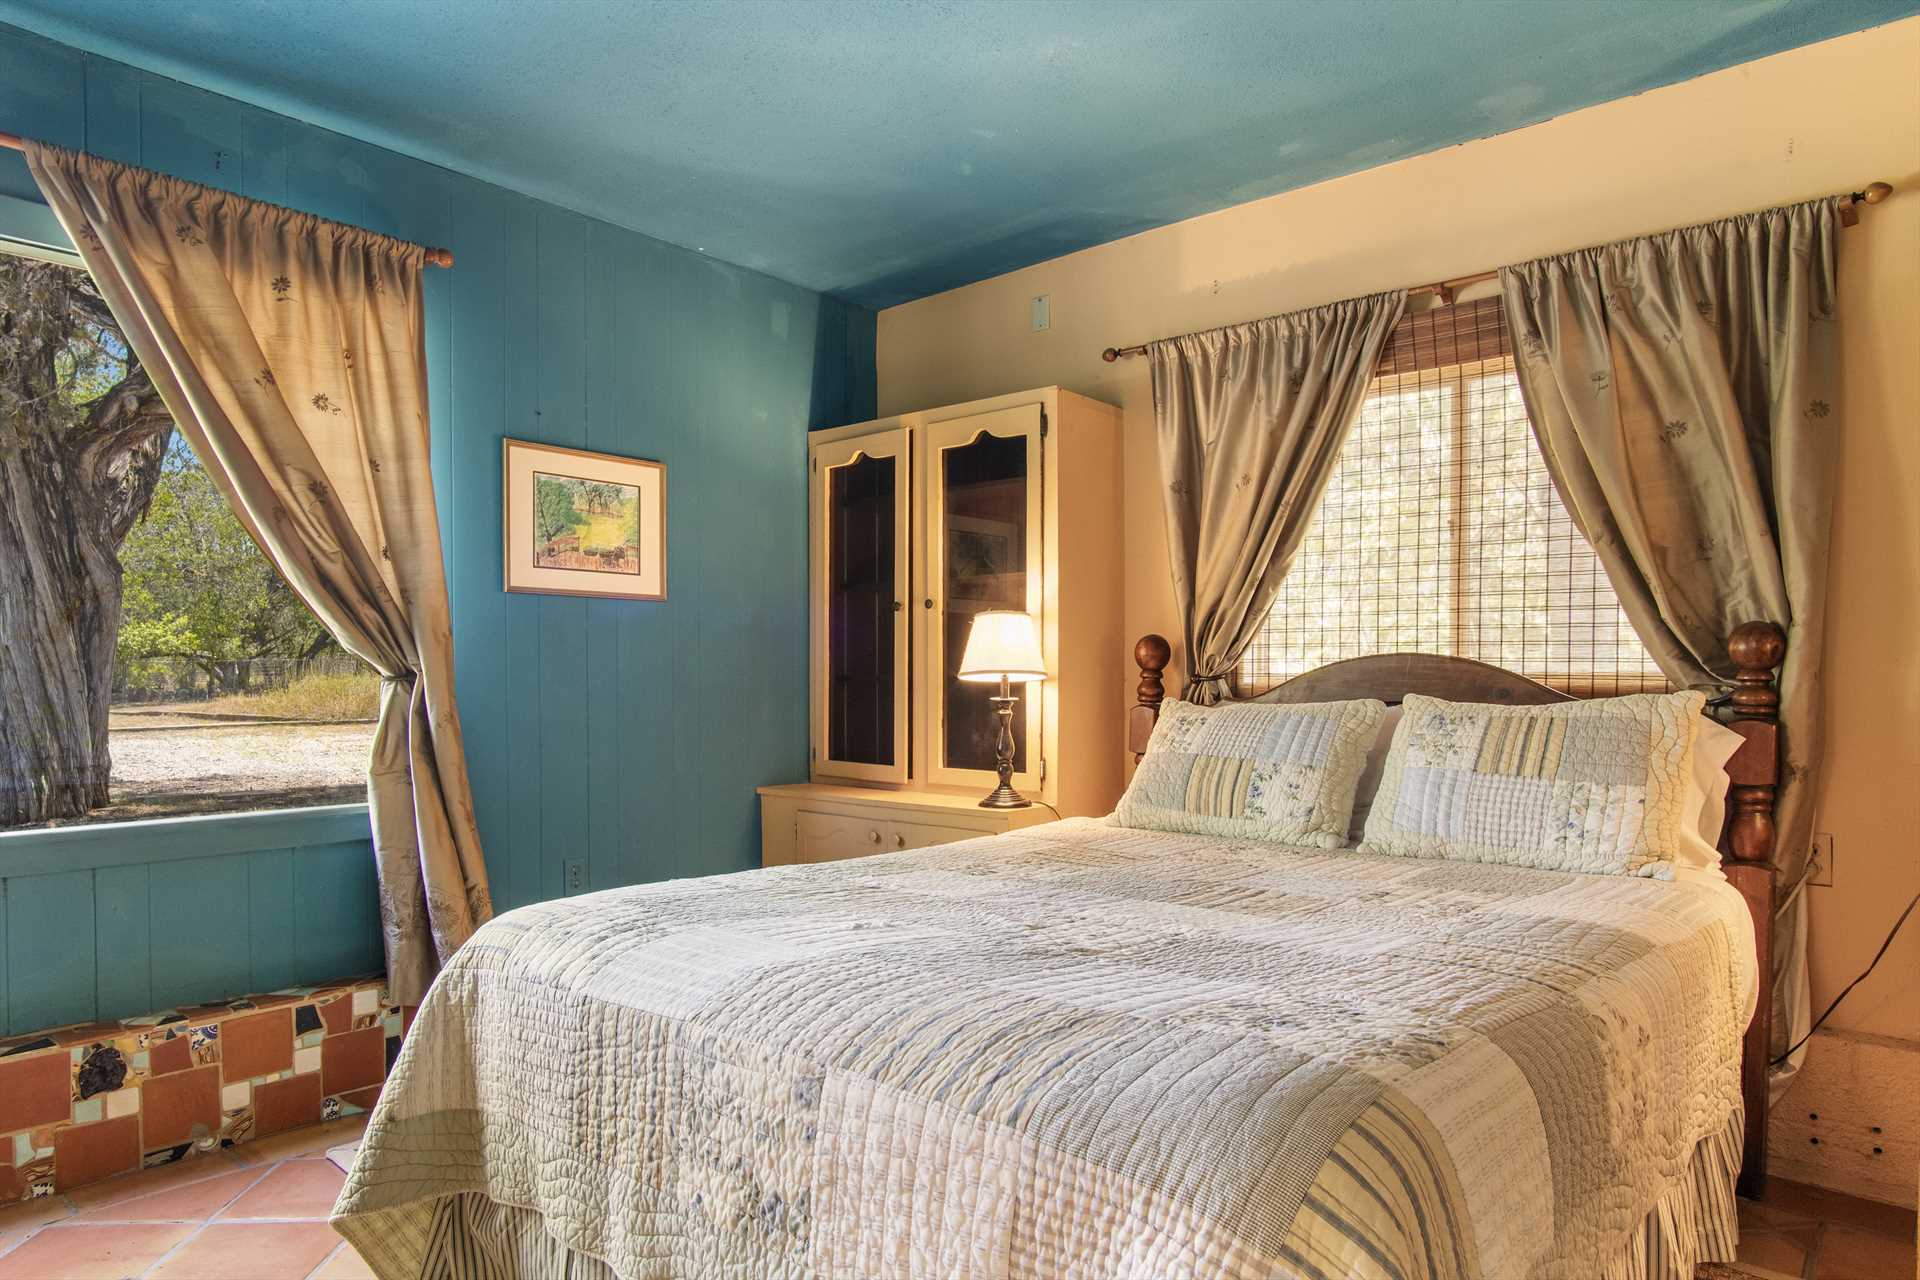                                                 Even from the bedrooms, the Hill Country views at Casa del Rio are remarkable!